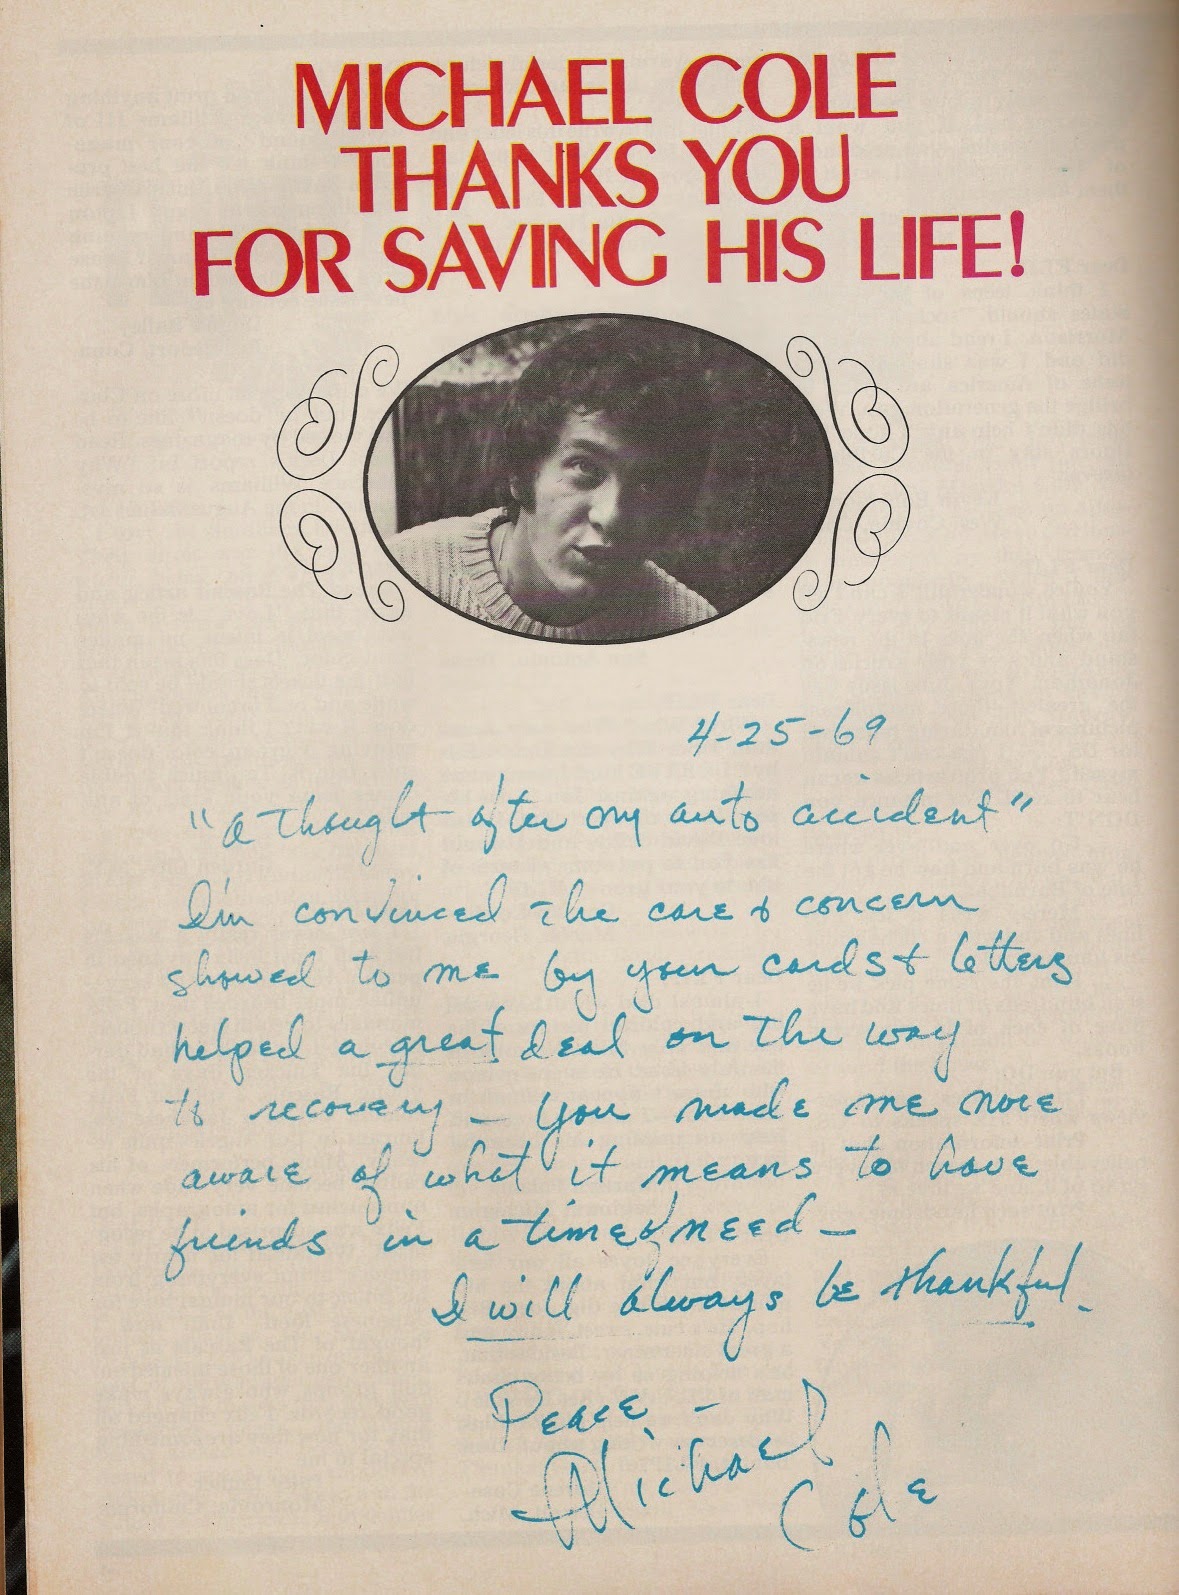 Friends of Michael Cole and fans of The Mod Squad.: Thank you letter after the car ...